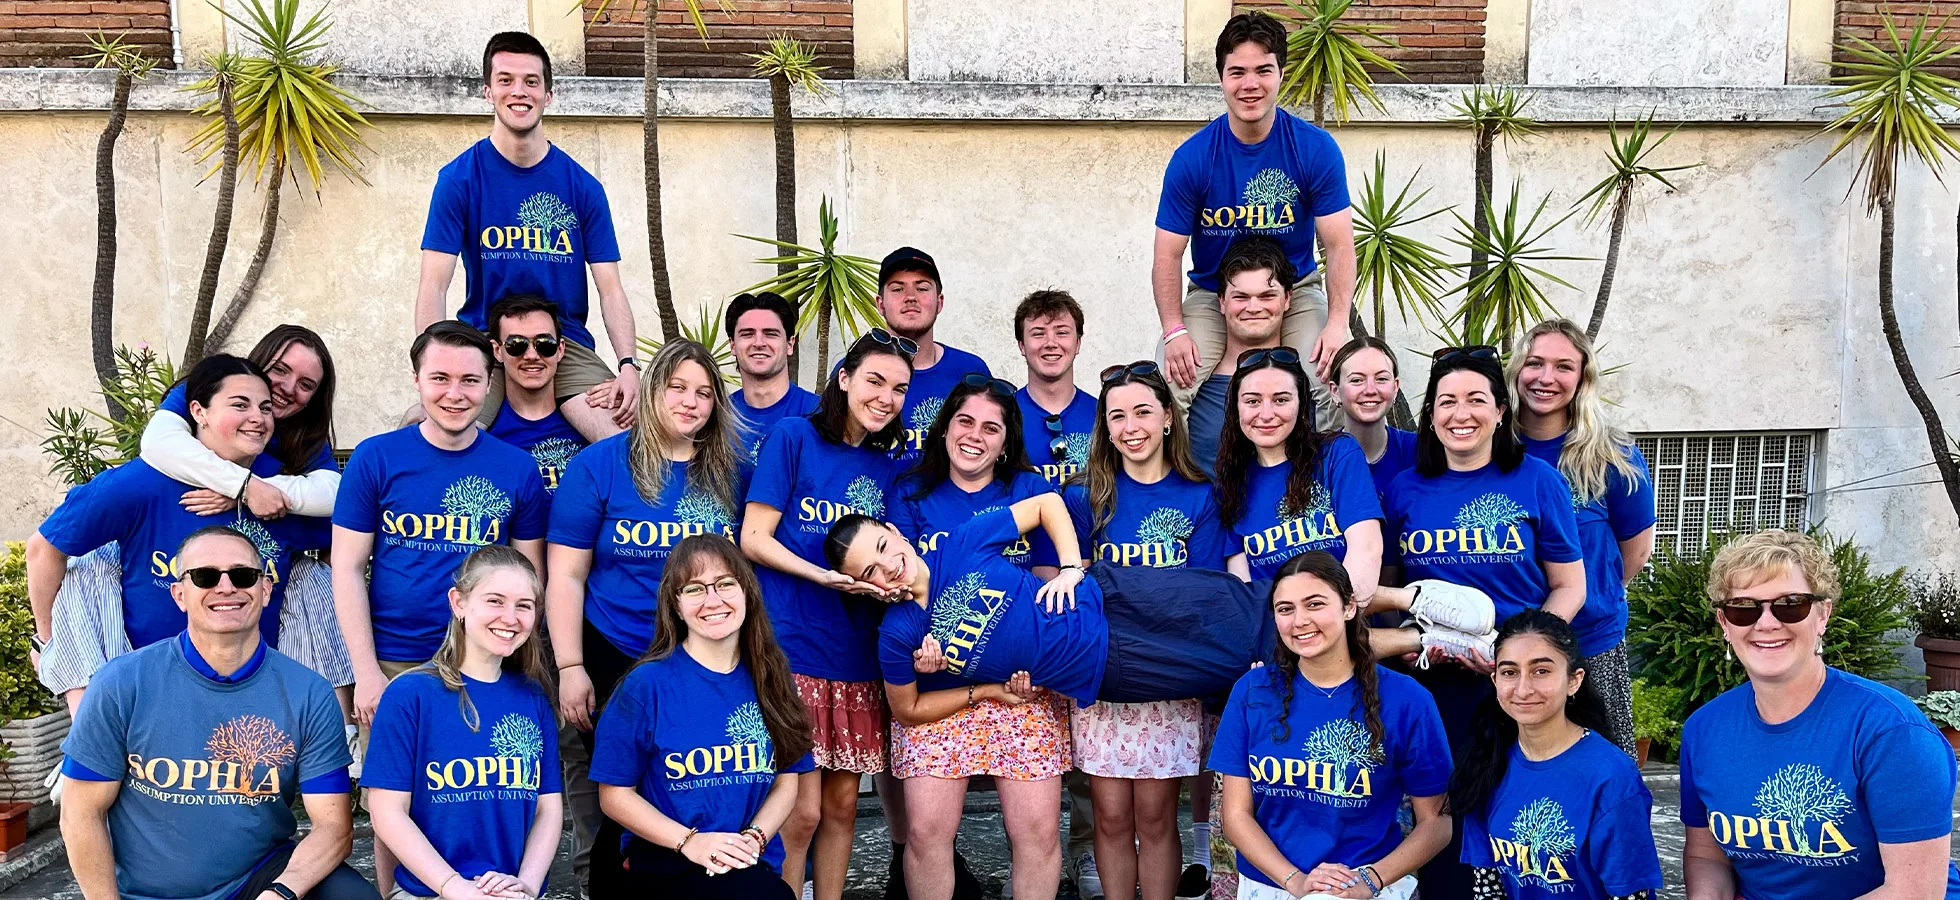 Each academic year, a group of 24 determined, dedicated Assumption sophomores take part in the SOPHIA Program: the Sophomore Initiative at Assumption.